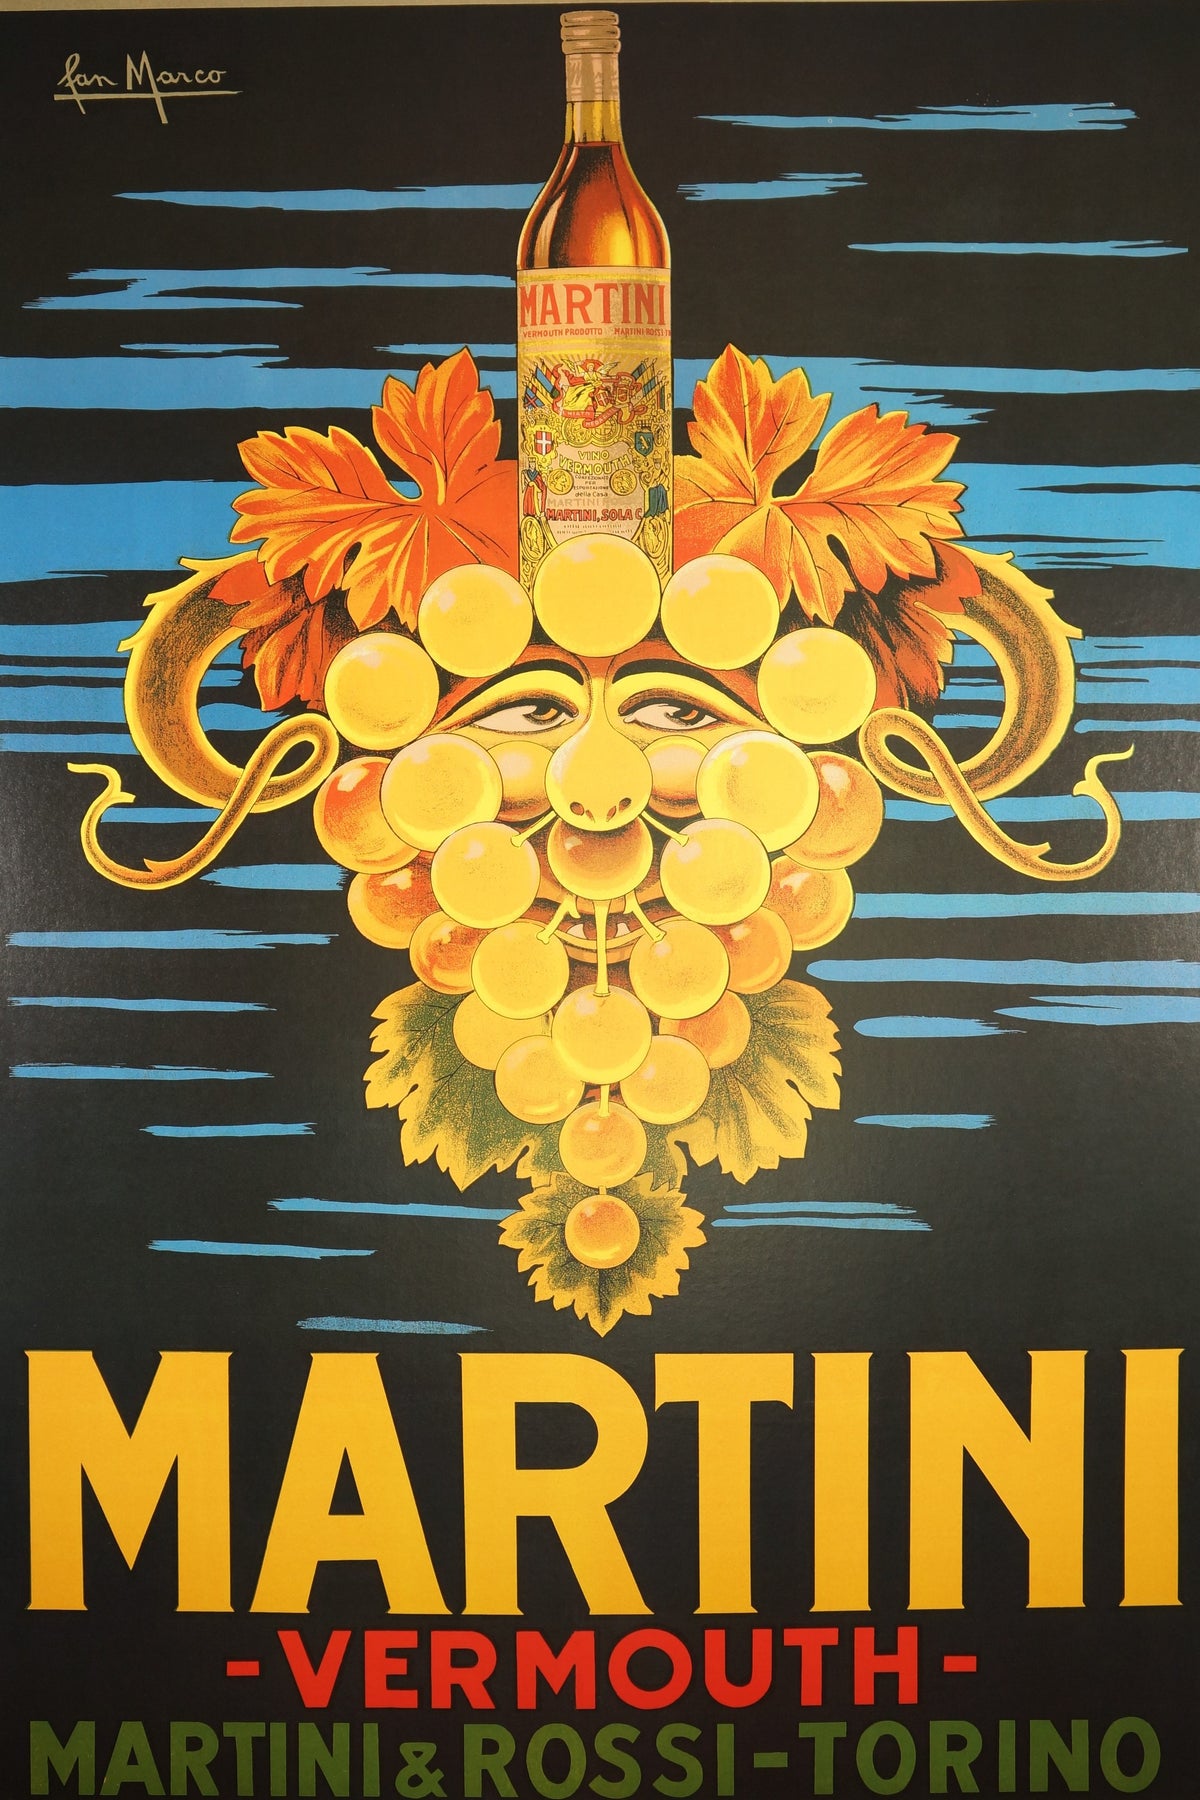 Martini Vermouth - Authentic Vintage Poster